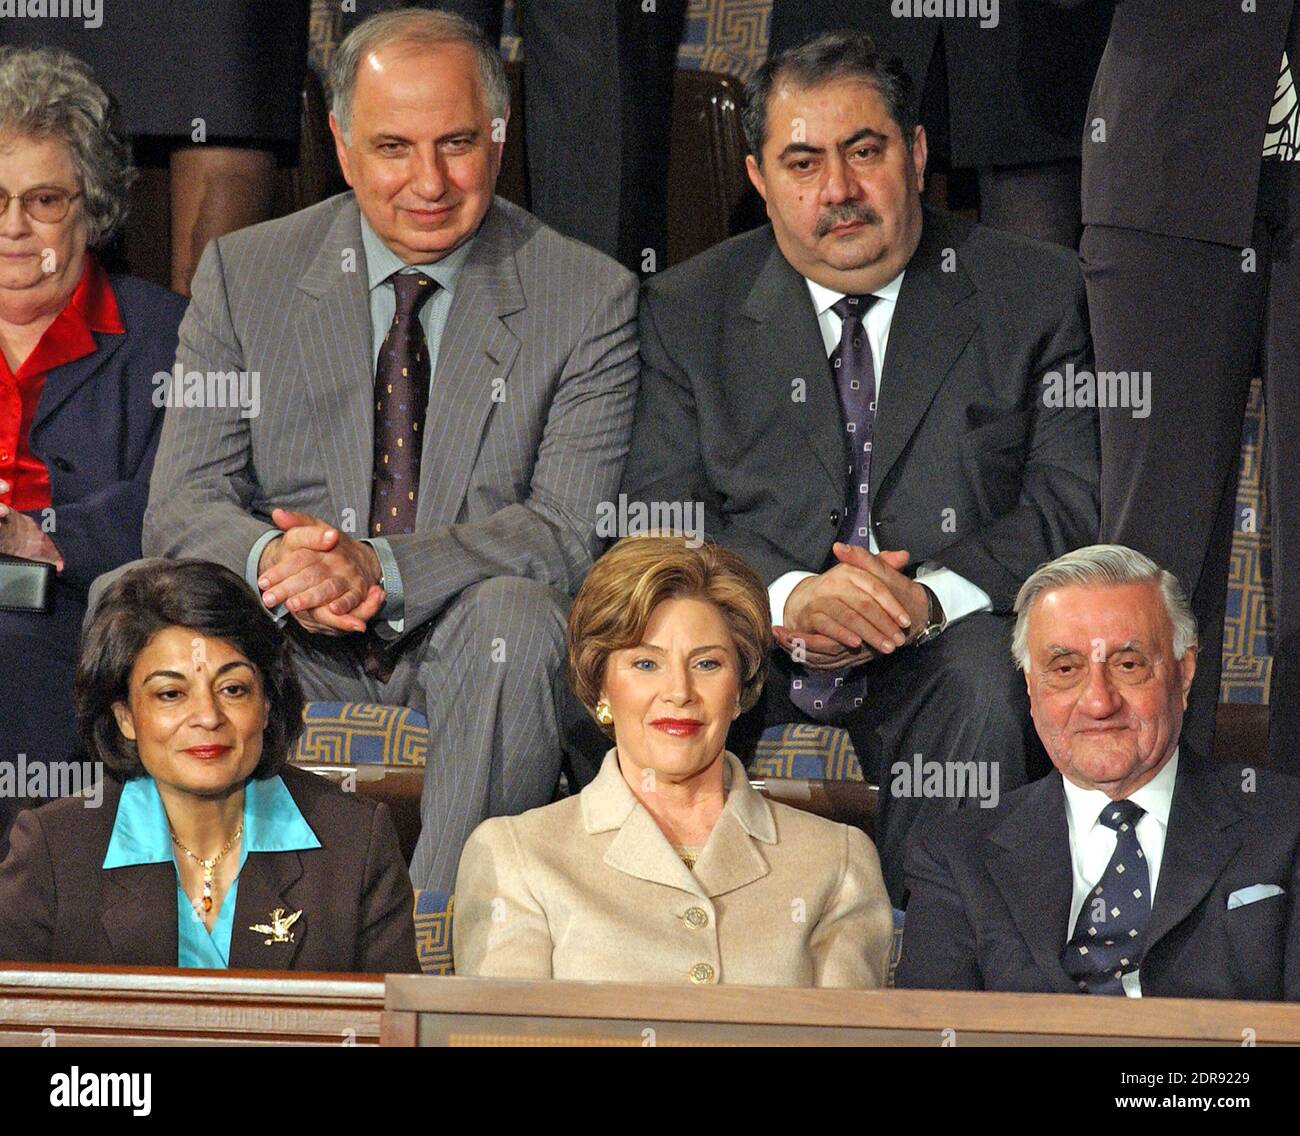 In this file photo from January 20, 2004, first lady Laura Bush sits with invited guests from the Iraqi Governing Council for her husband, United States President George W. Bush's 2004 State of the Union Address to a Joint Session of the United States Congress at the Capitol in Washington, D.C. on January 20, 2004. Left to right in the top row: Doctor Ahmed Chalabi, Iraqi Governing Council; and Hoshyar Zebari, Iraqi Interim Foreign Minister. Left to right on the bottom row: Ms. Rend al-Rahim, Iraqi Senior Diplomatic Representative; first lady Laura Bush; and Doctor Adnan Pachachi, President, I Stock Photo